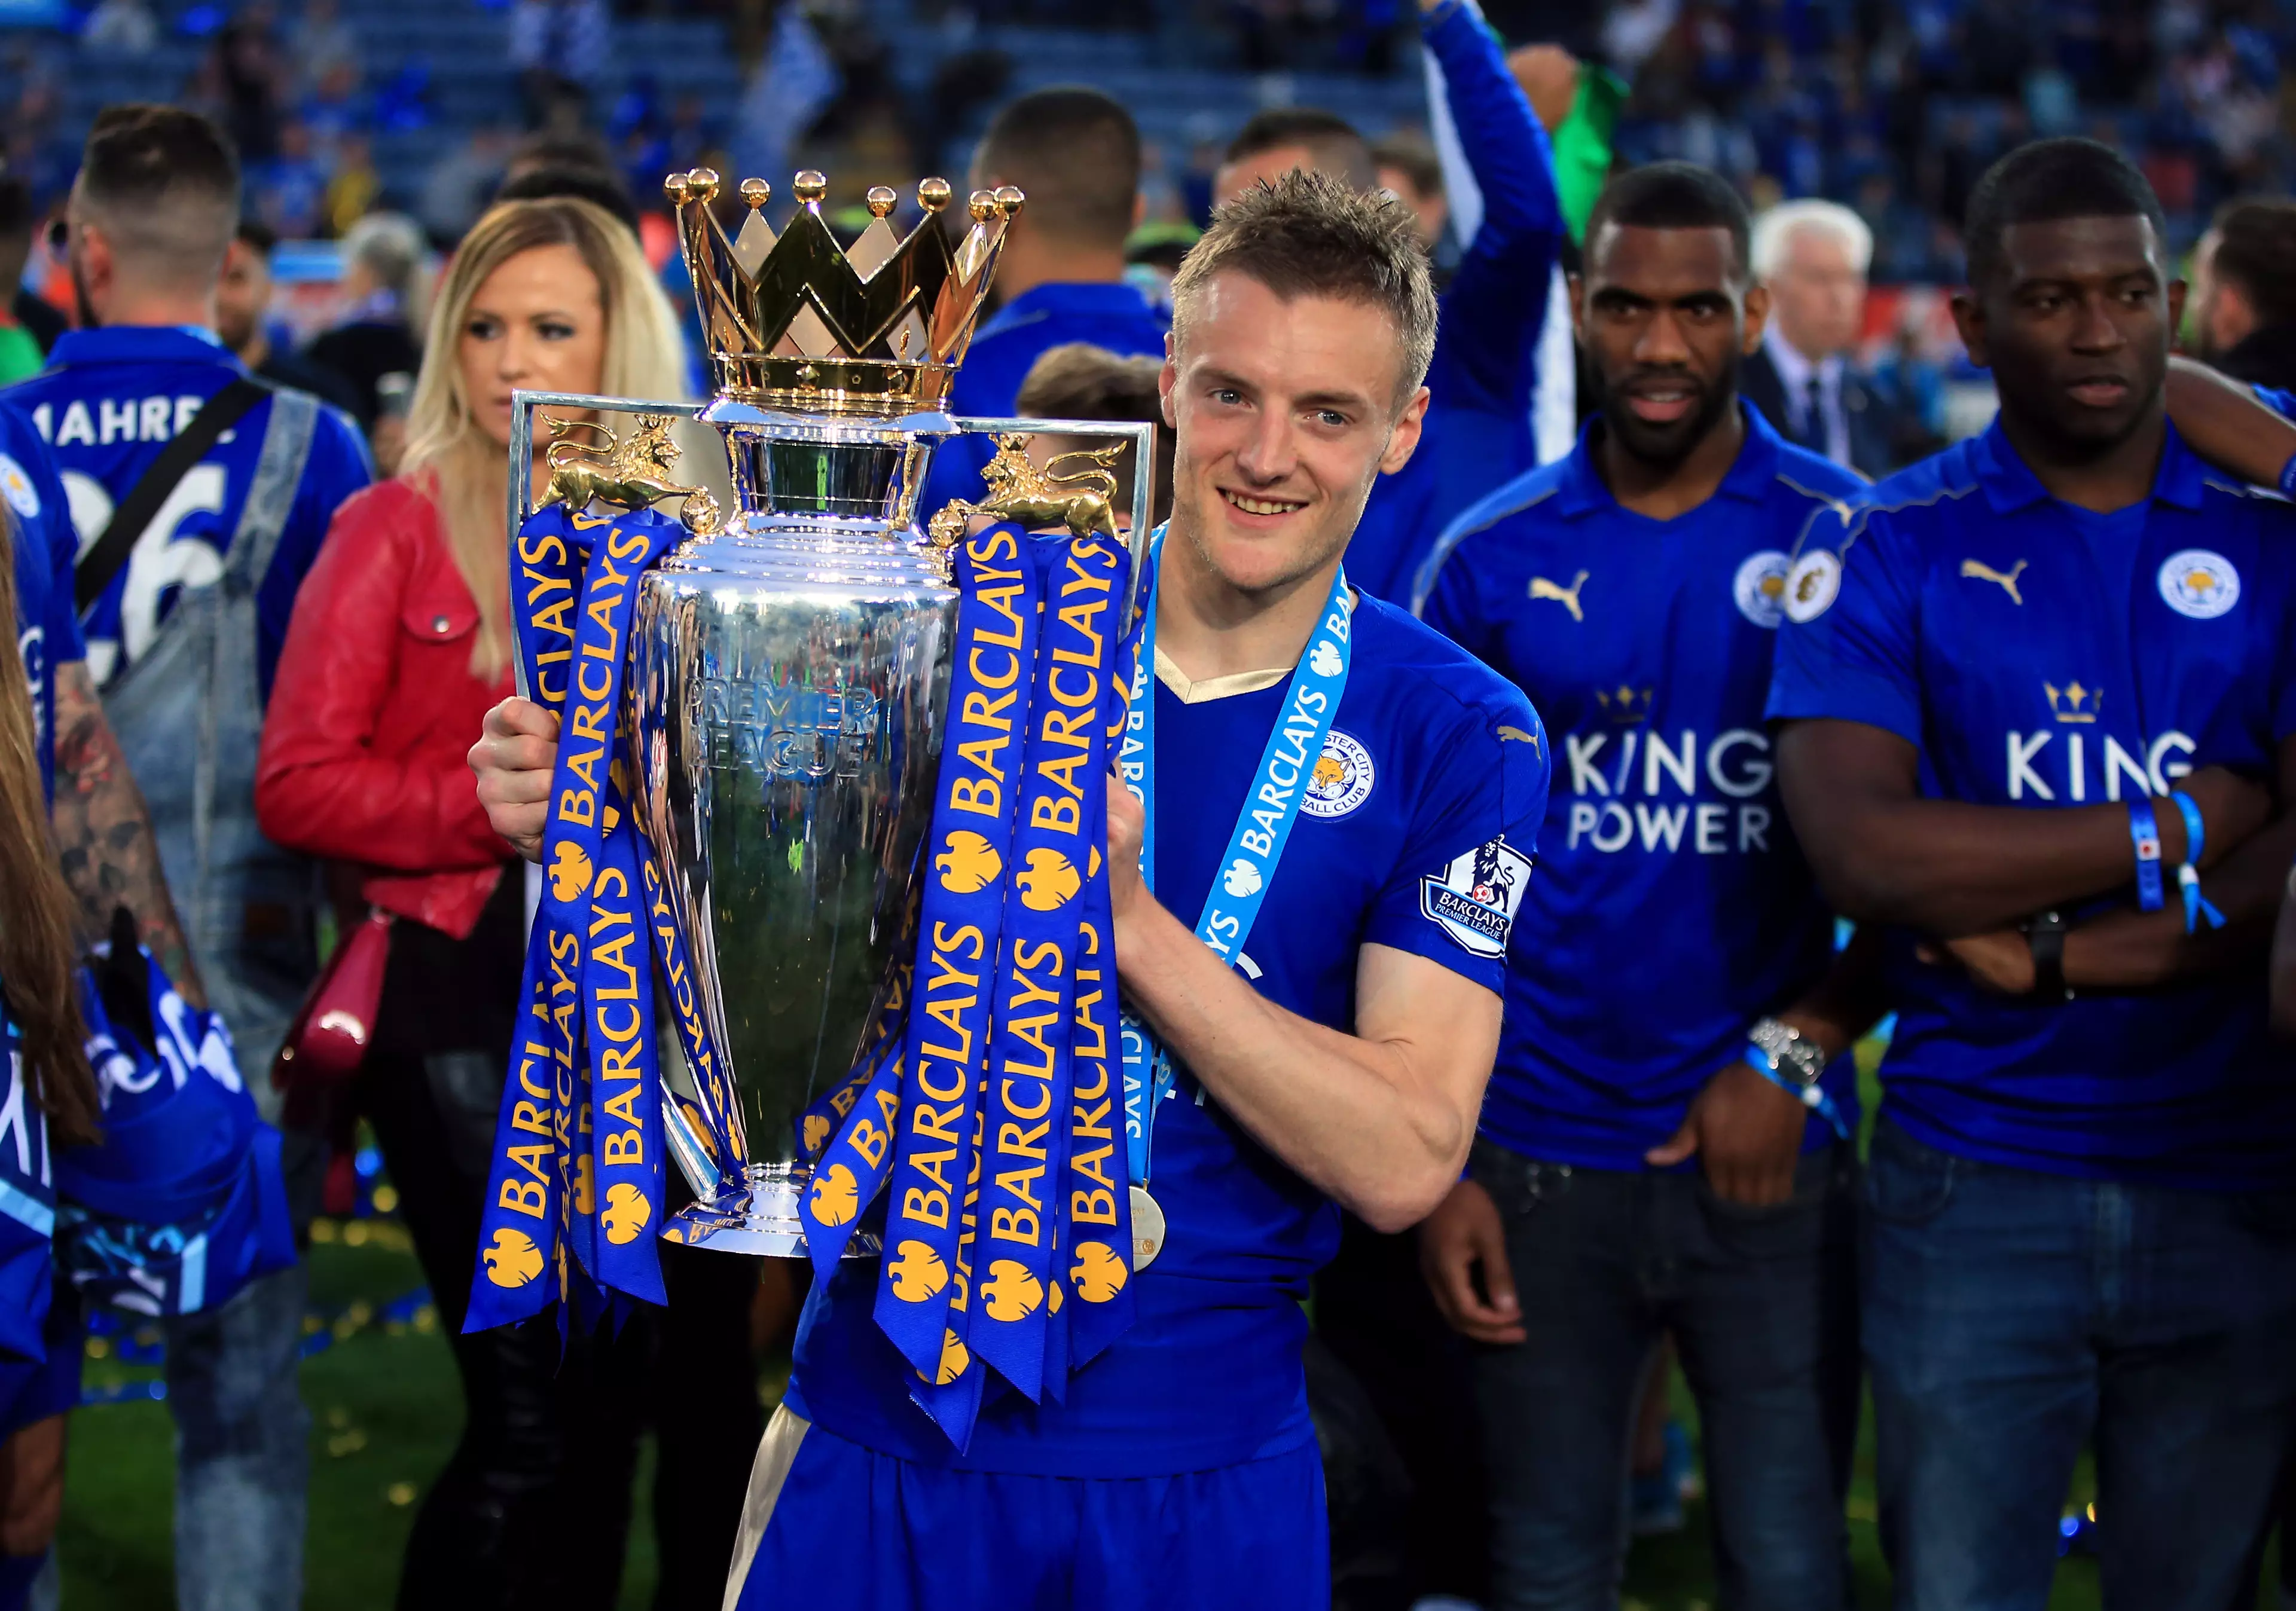 Three Coaches Voted For Jamie Vardy As FIFA Best Player In 2016